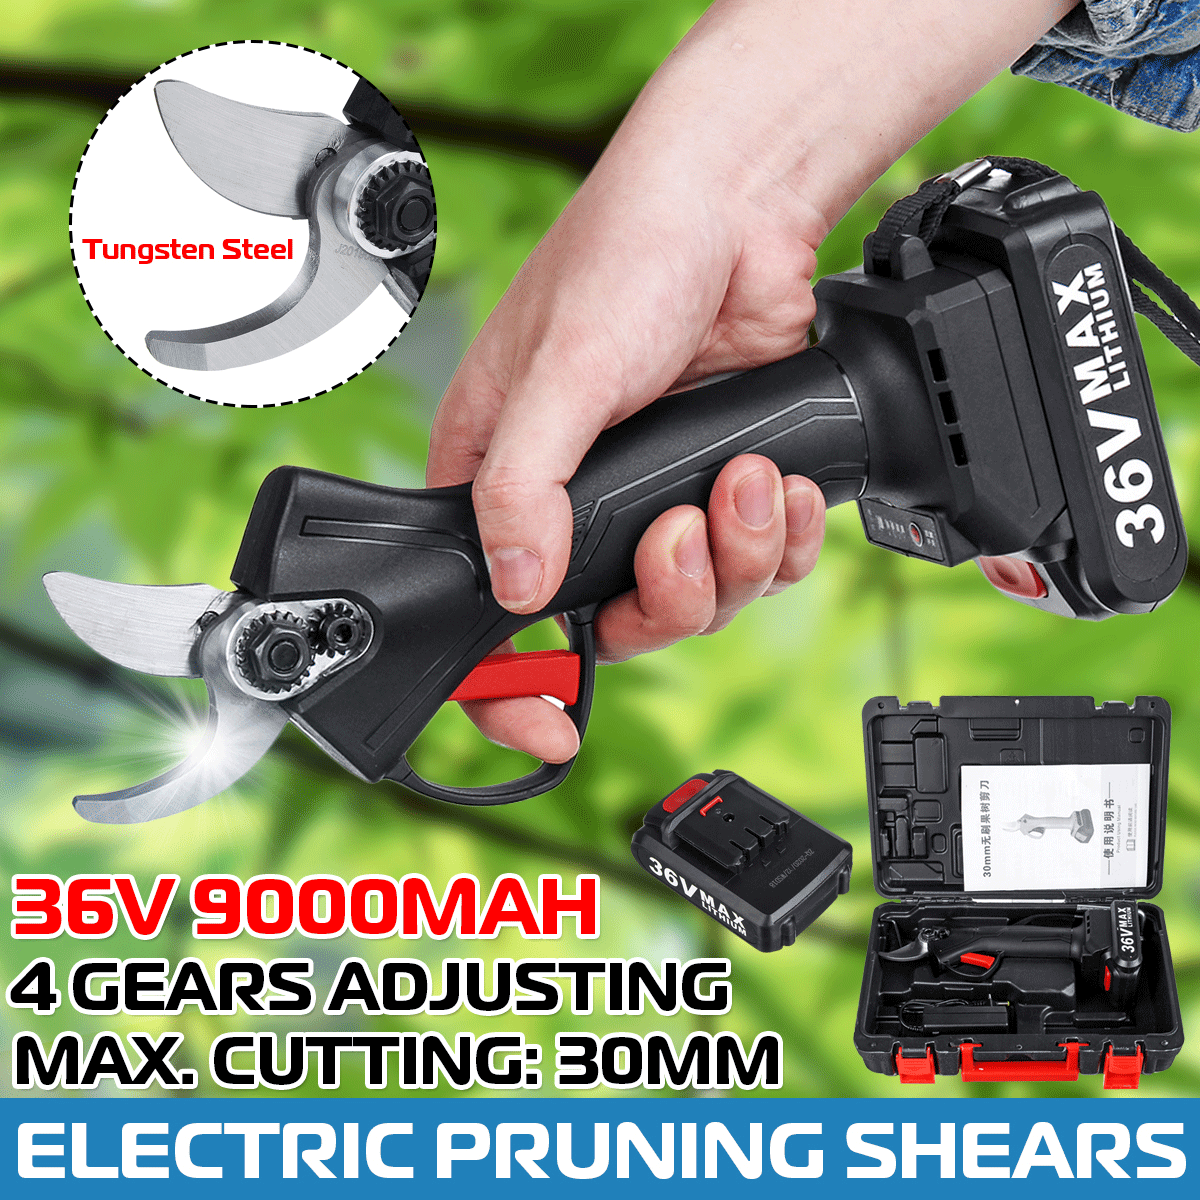 36V-Cordless-Rechargeable-Electric-Pruning-Shears-Secateur-Low-Noise-Branch-Cutter-Scissor-Trimmer-W-1660335-2